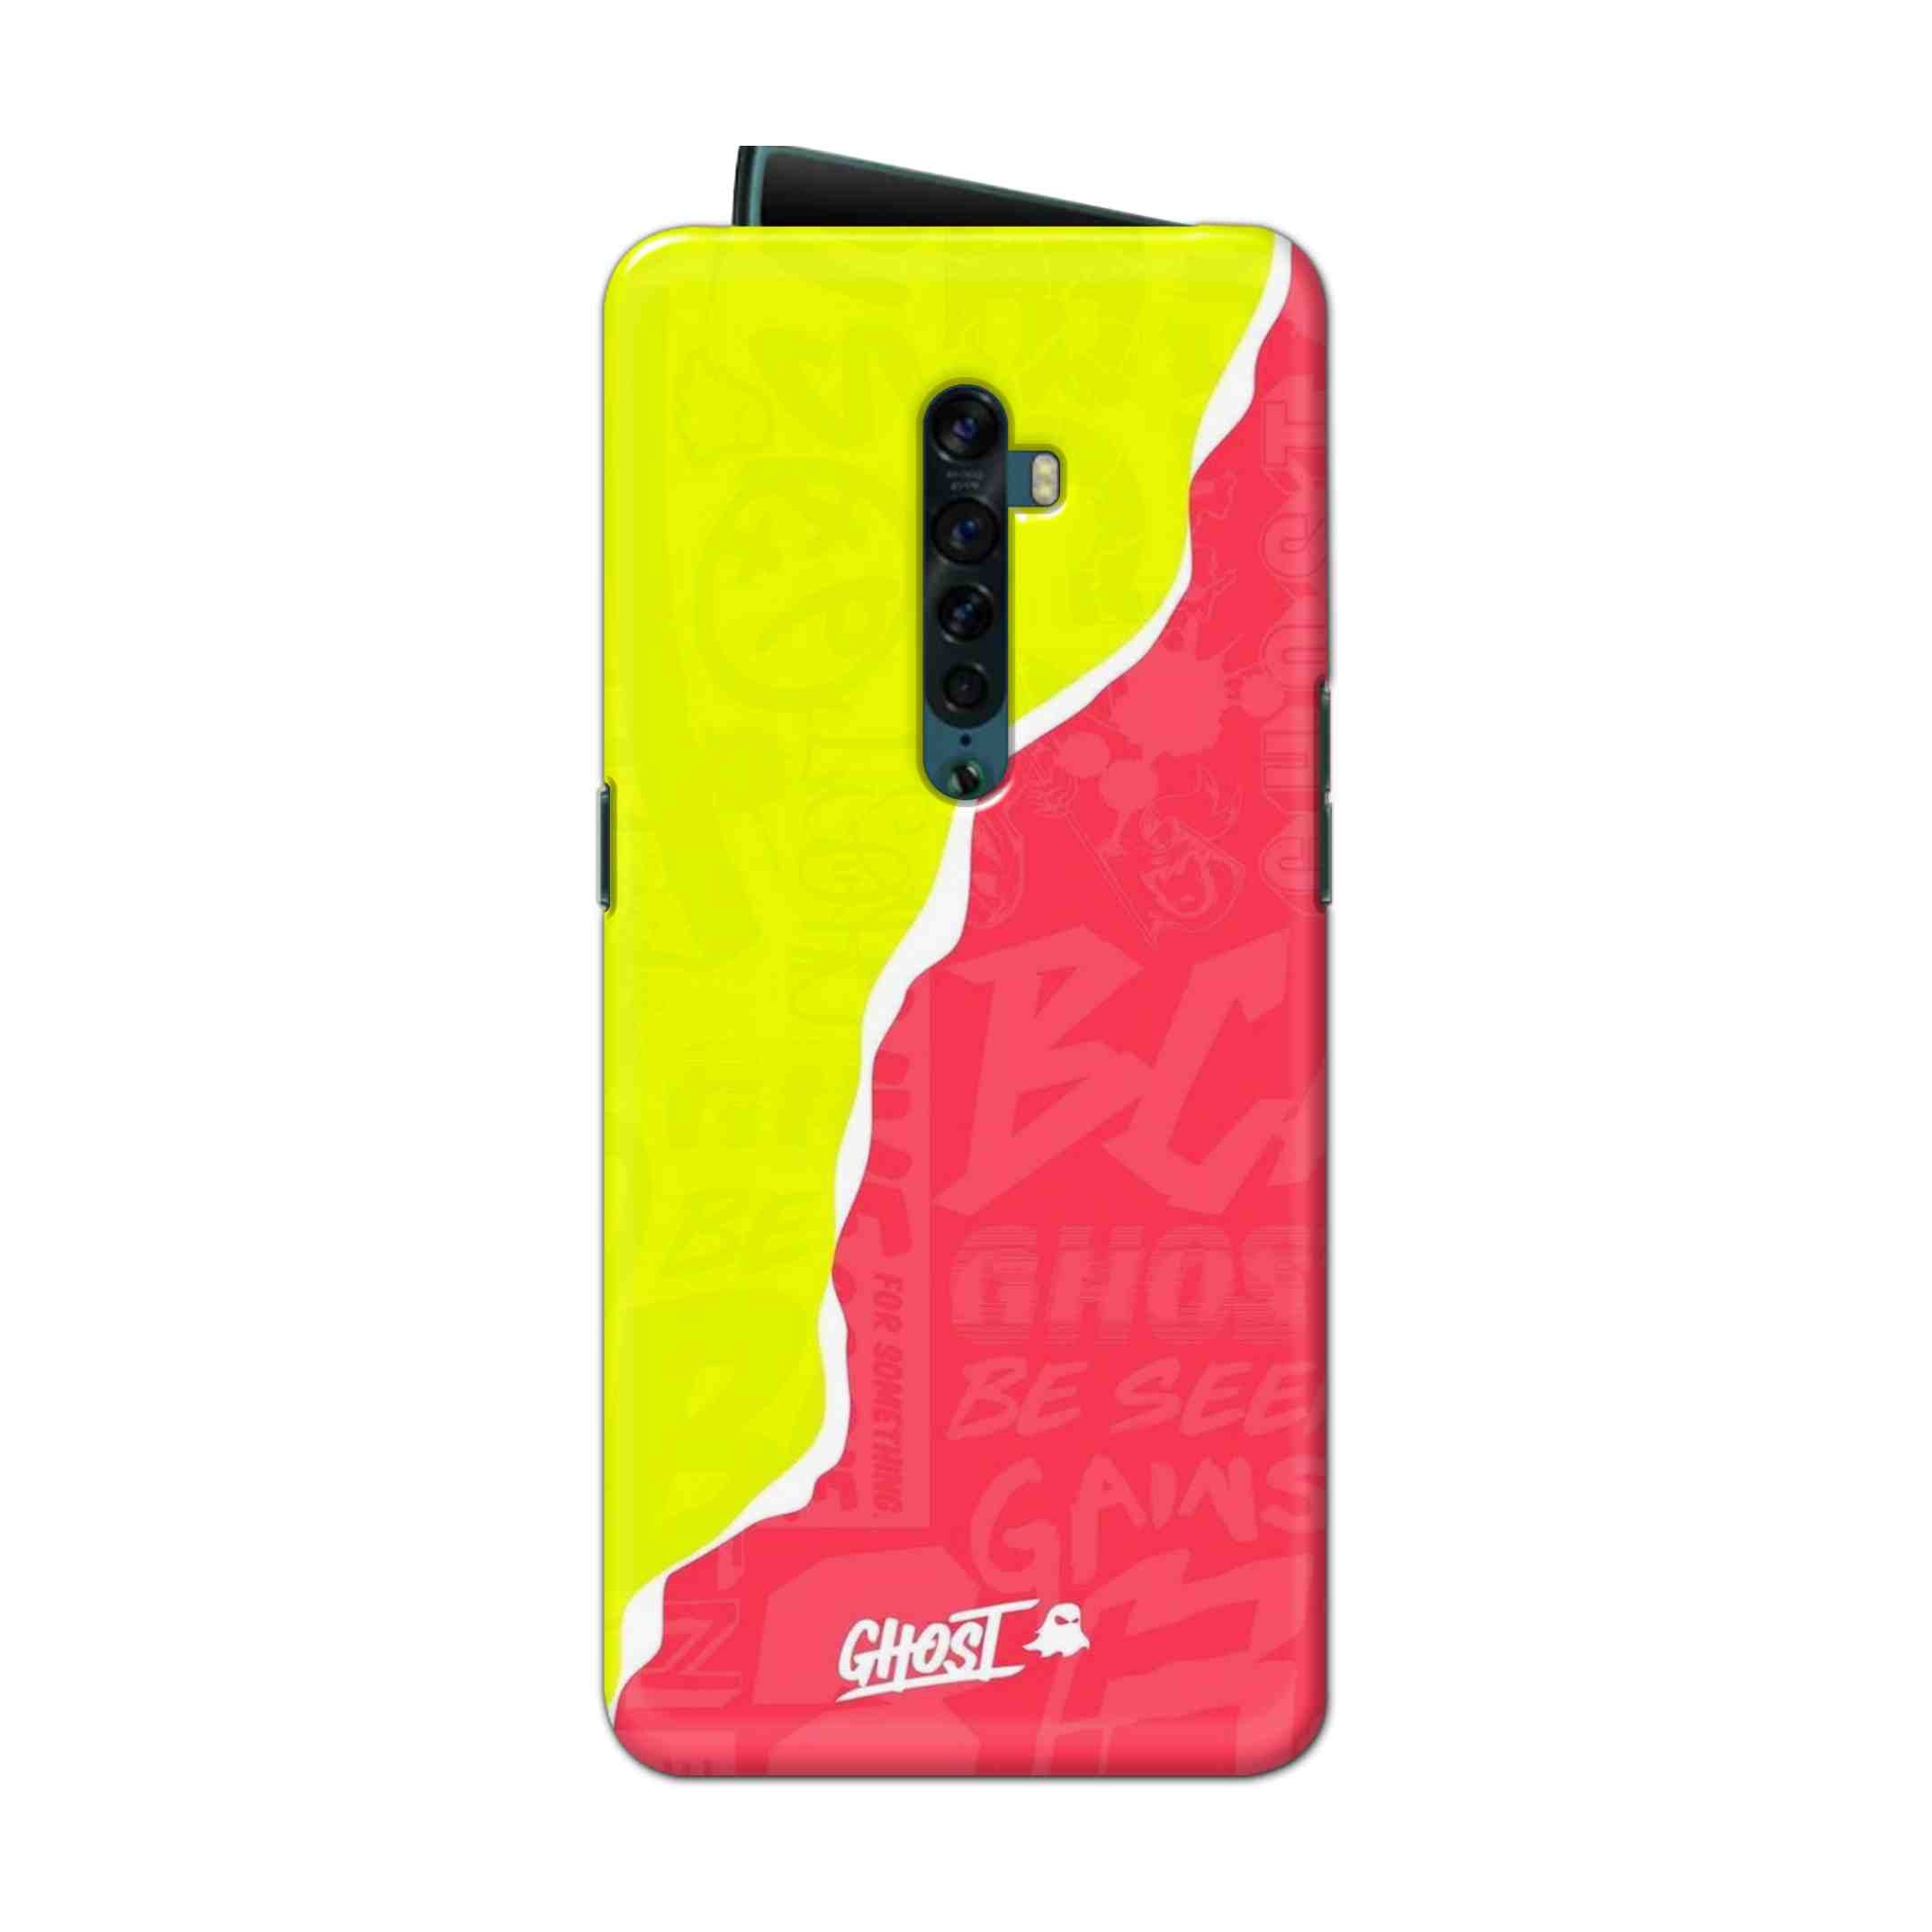 Buy Ghost Hard Back Mobile Phone Case Cover For Oppo Reno 2 Online